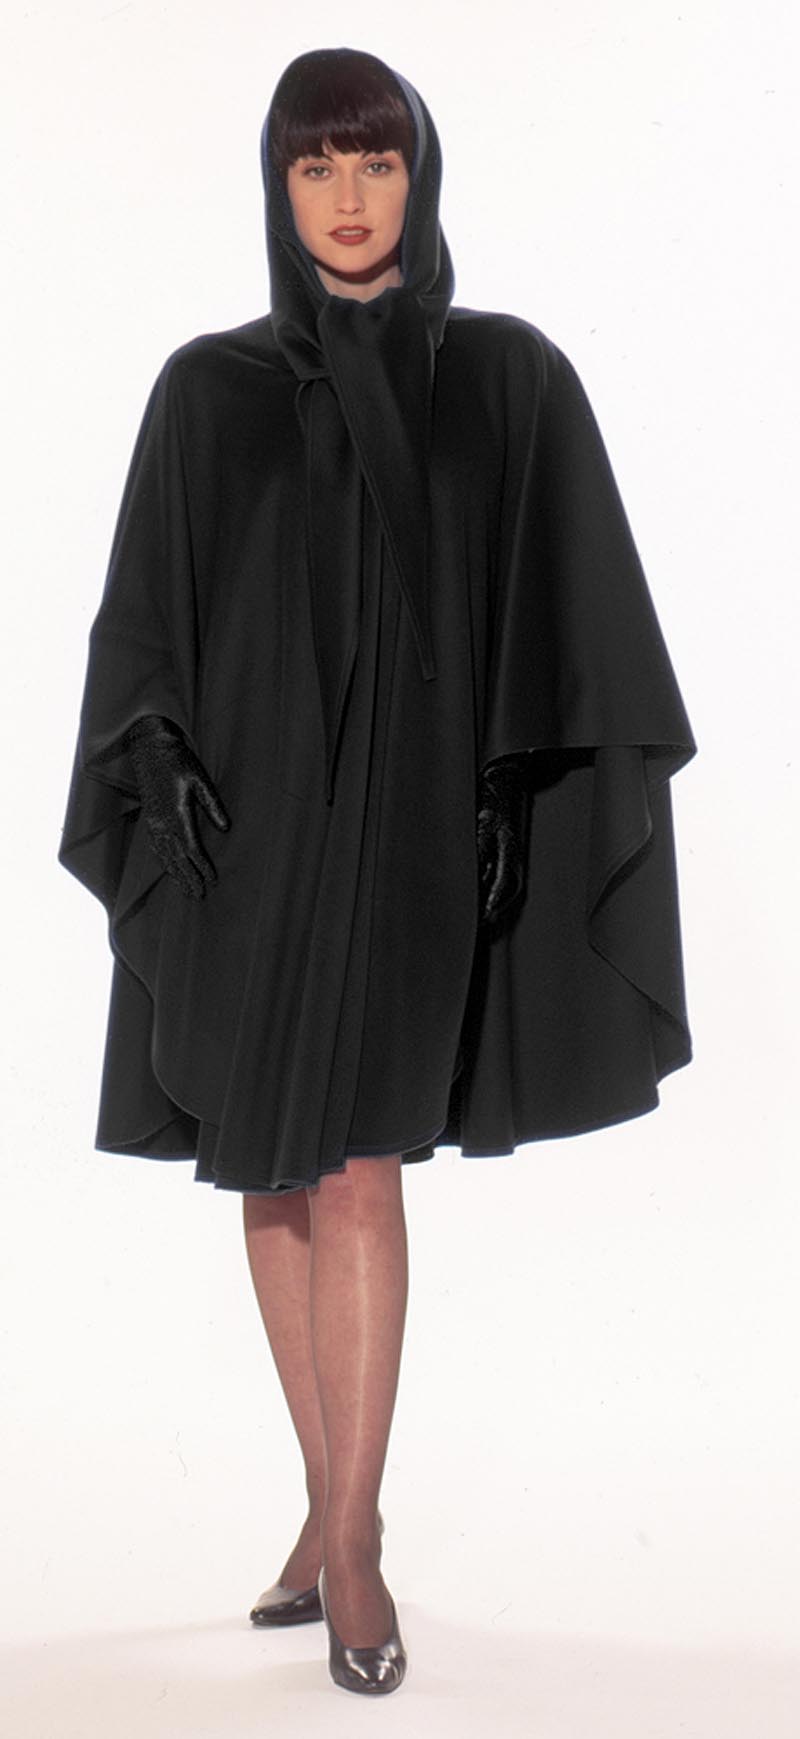 Product image for Irish New Wool Cape